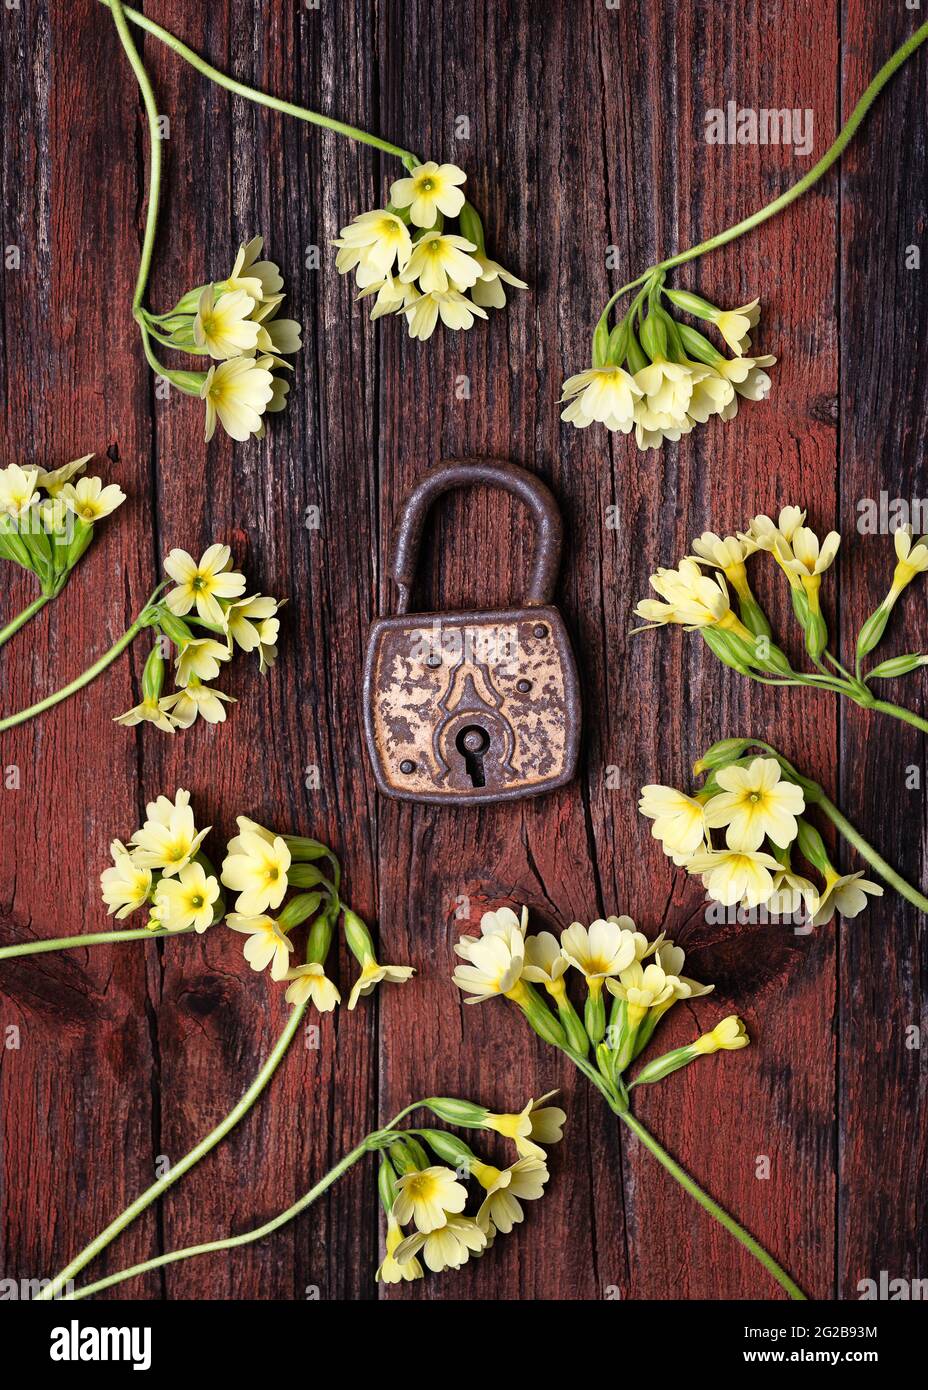 Old rusty padlock around spring wild yellow cowslip flowers on a rustic wooden background. (Primula veris) Stock Photo